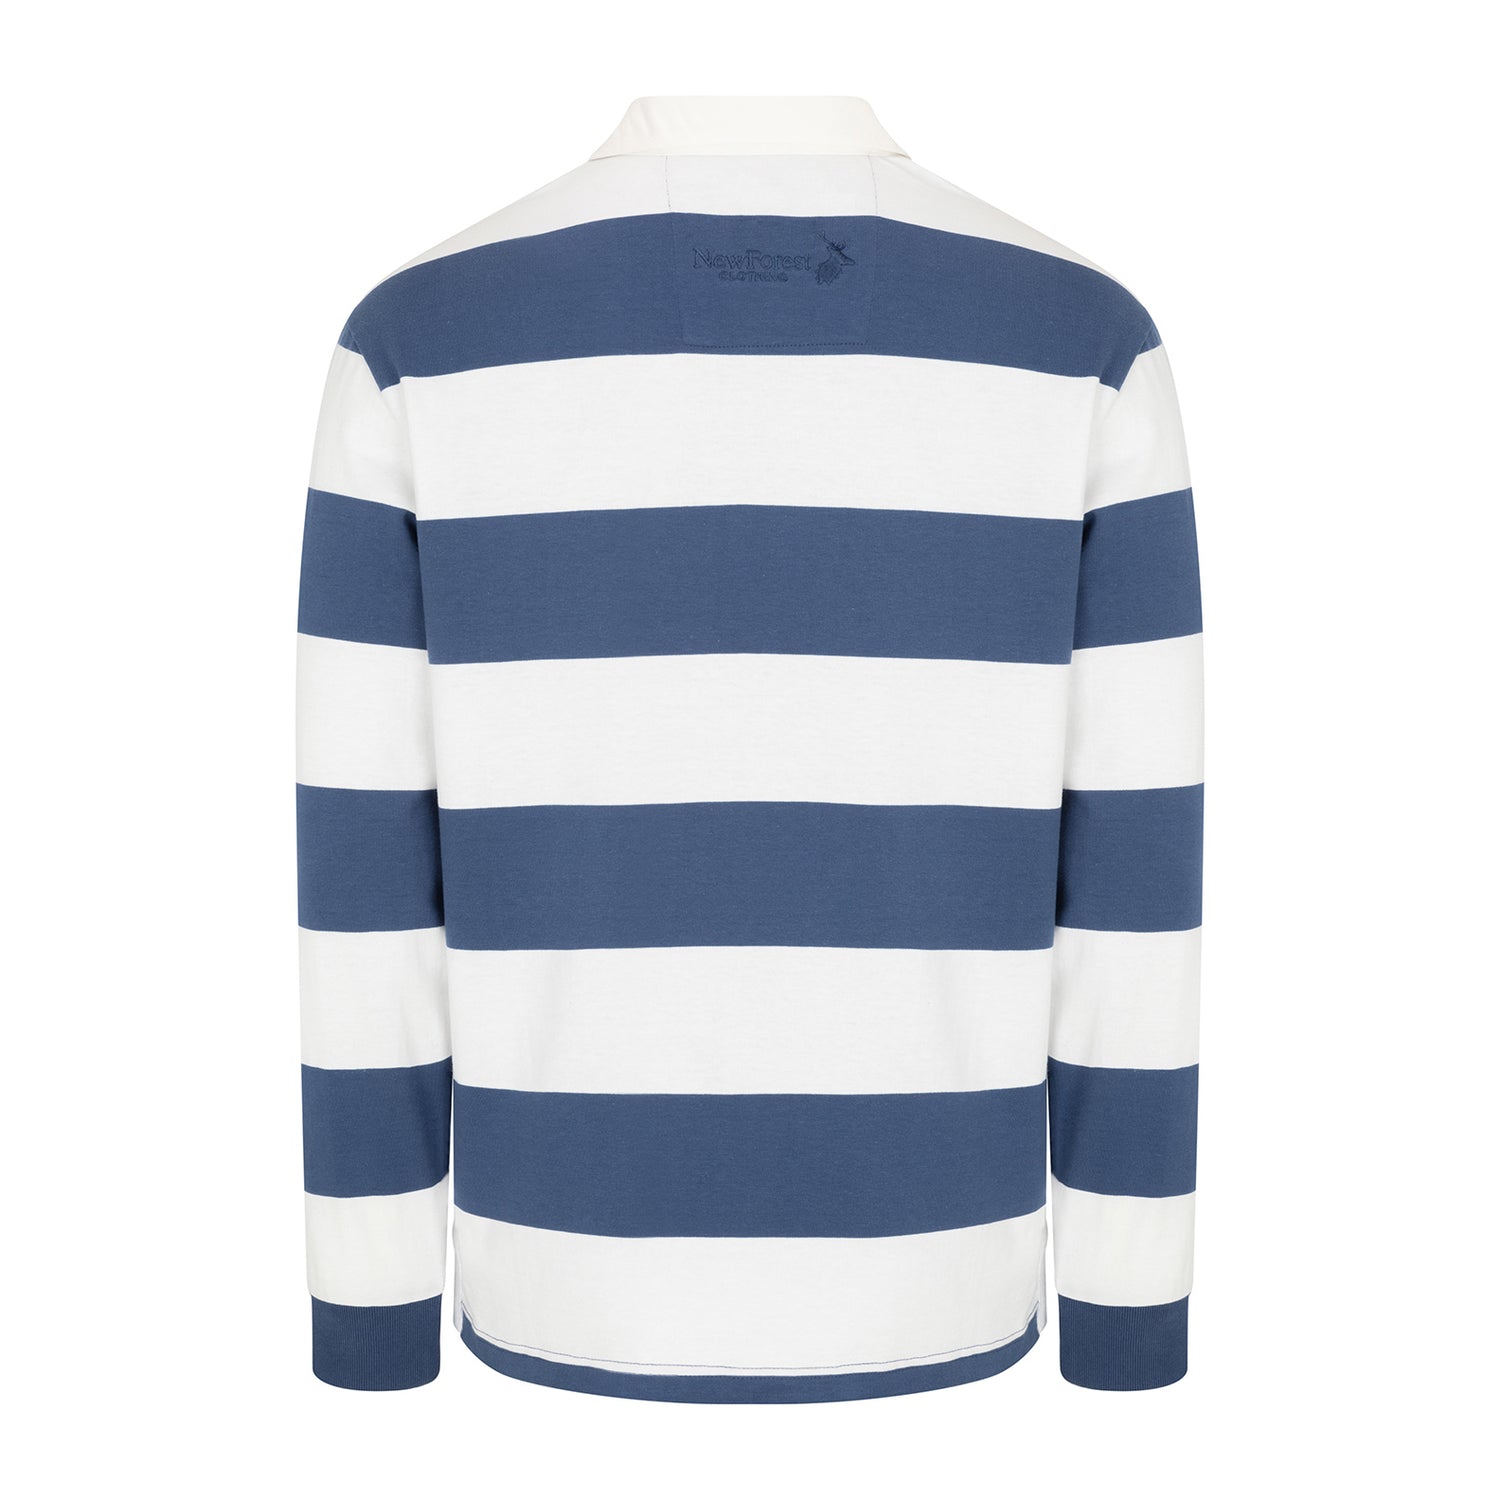 New Forest Classic Stripe Rugby Shirt